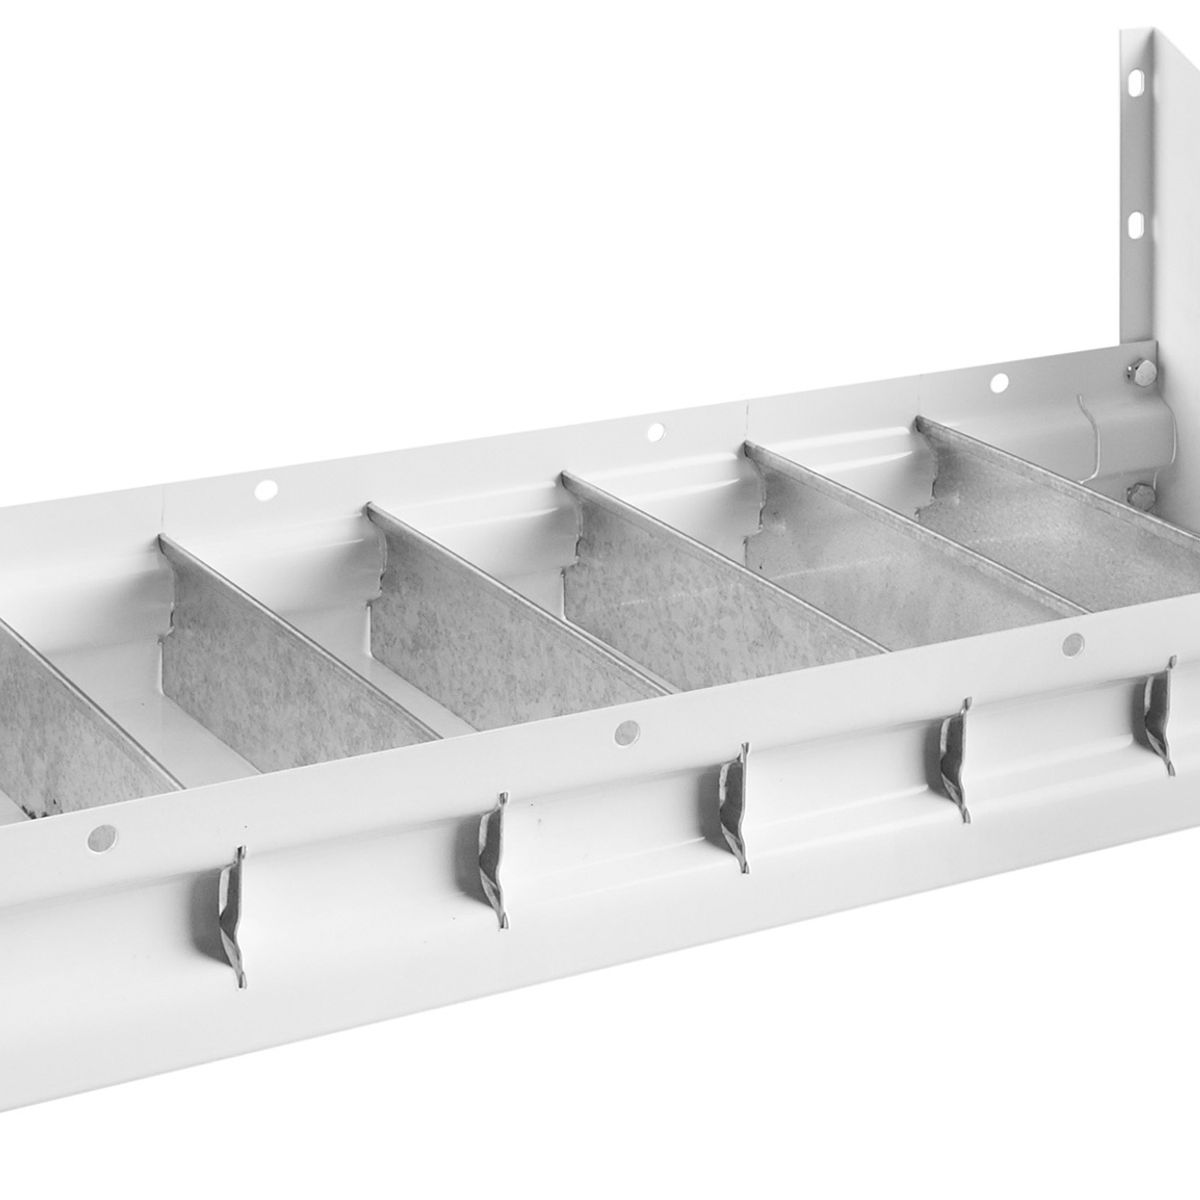 613-3 Weather Guard Steel Tool Box Tray w//Accessory Dividers White